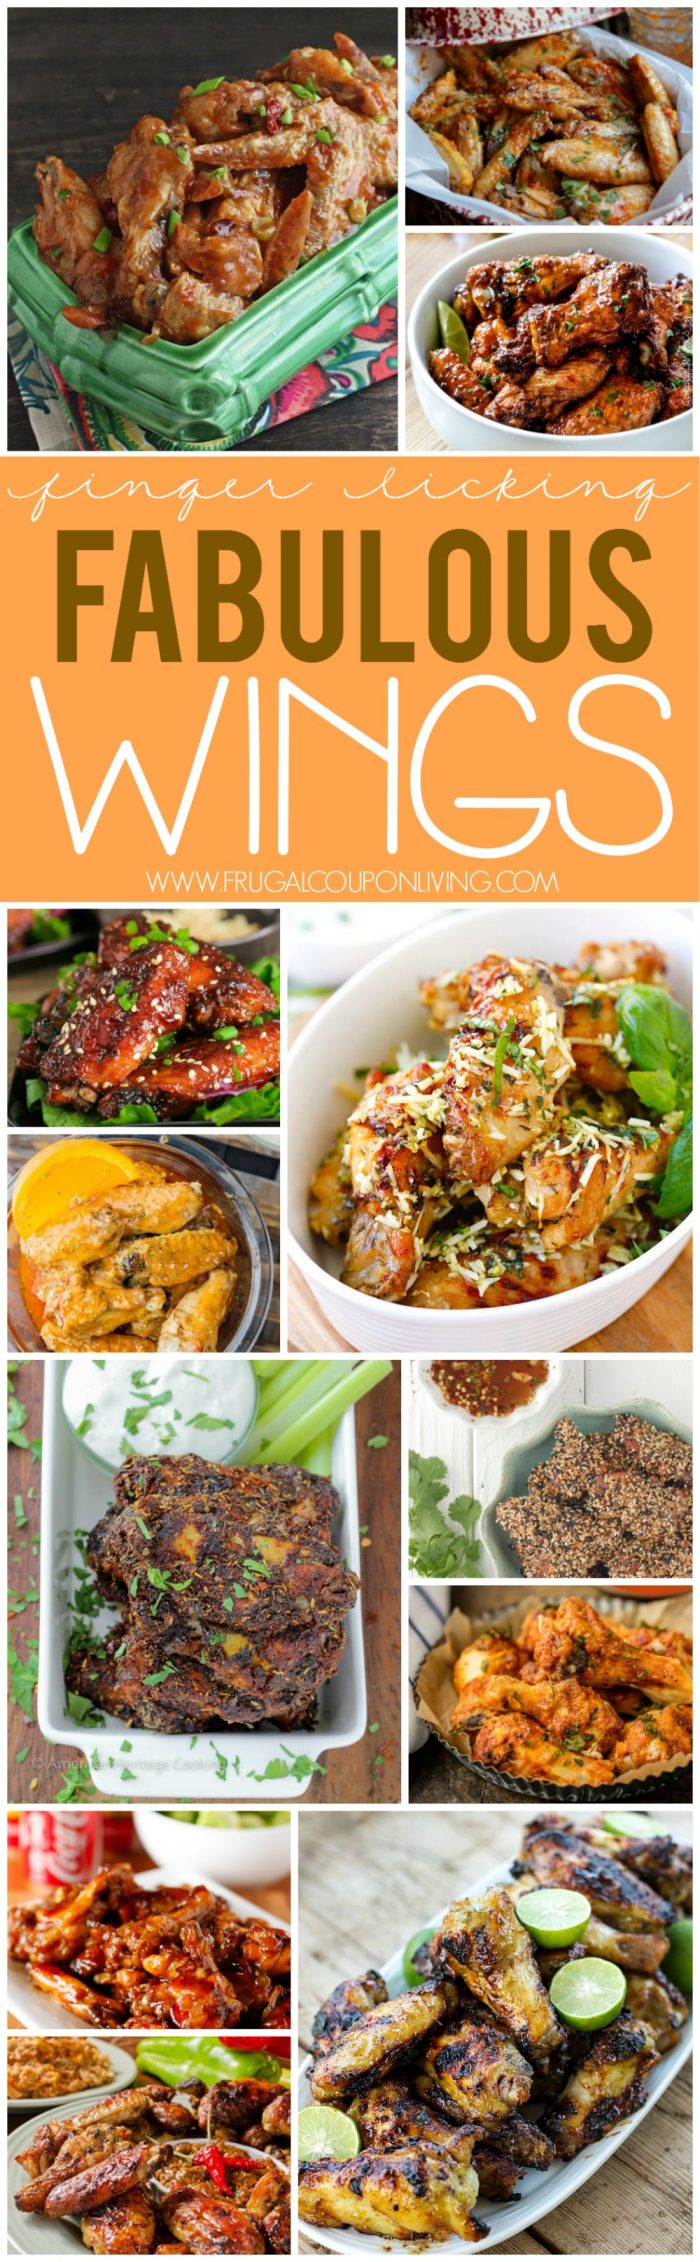 Fabulous-Wing-Recipes-Collage-Frugal-coupon-living